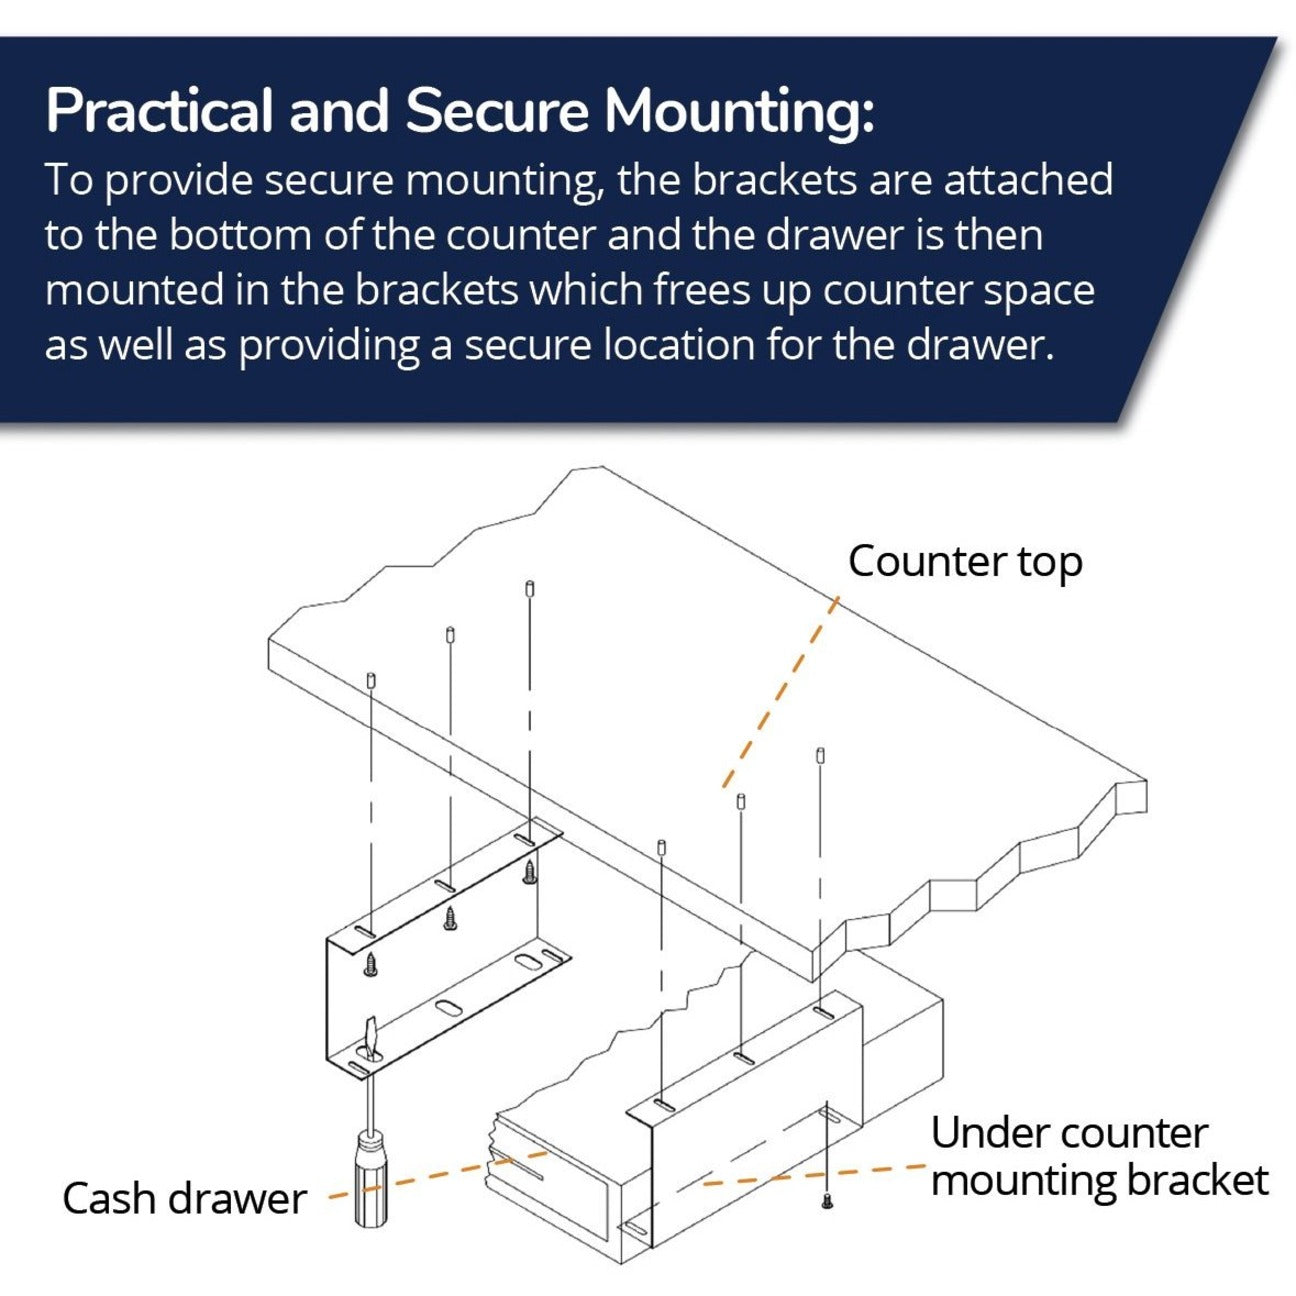 apg PK-27-BX S100 Cash Drawer Under Counter Mounting Bracket, Counter Mounting Solution